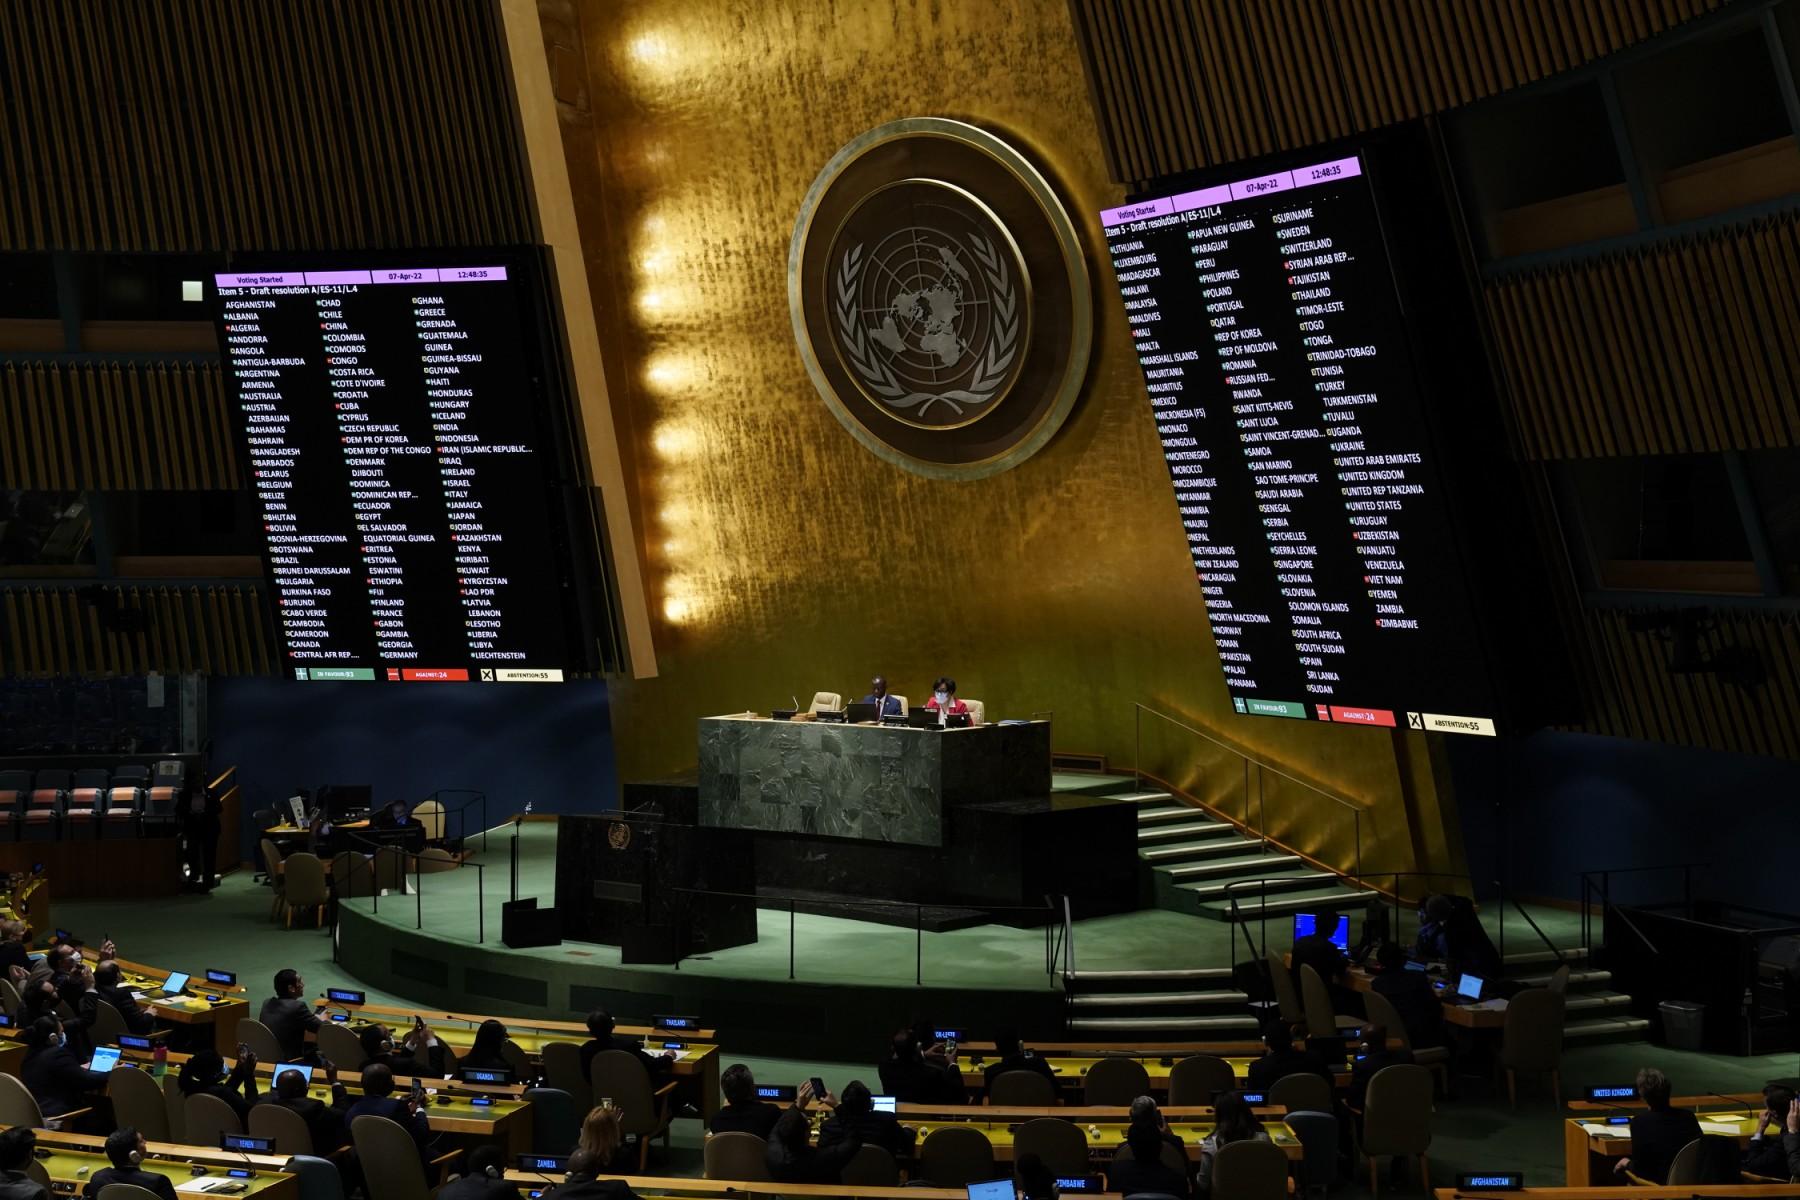 The board showing the passage of the resolution during a UN General Assembly vote on a draft resolution seeking to suspend Russia from the UN Human Rights Council in New York City on April 7. Photo: AFP